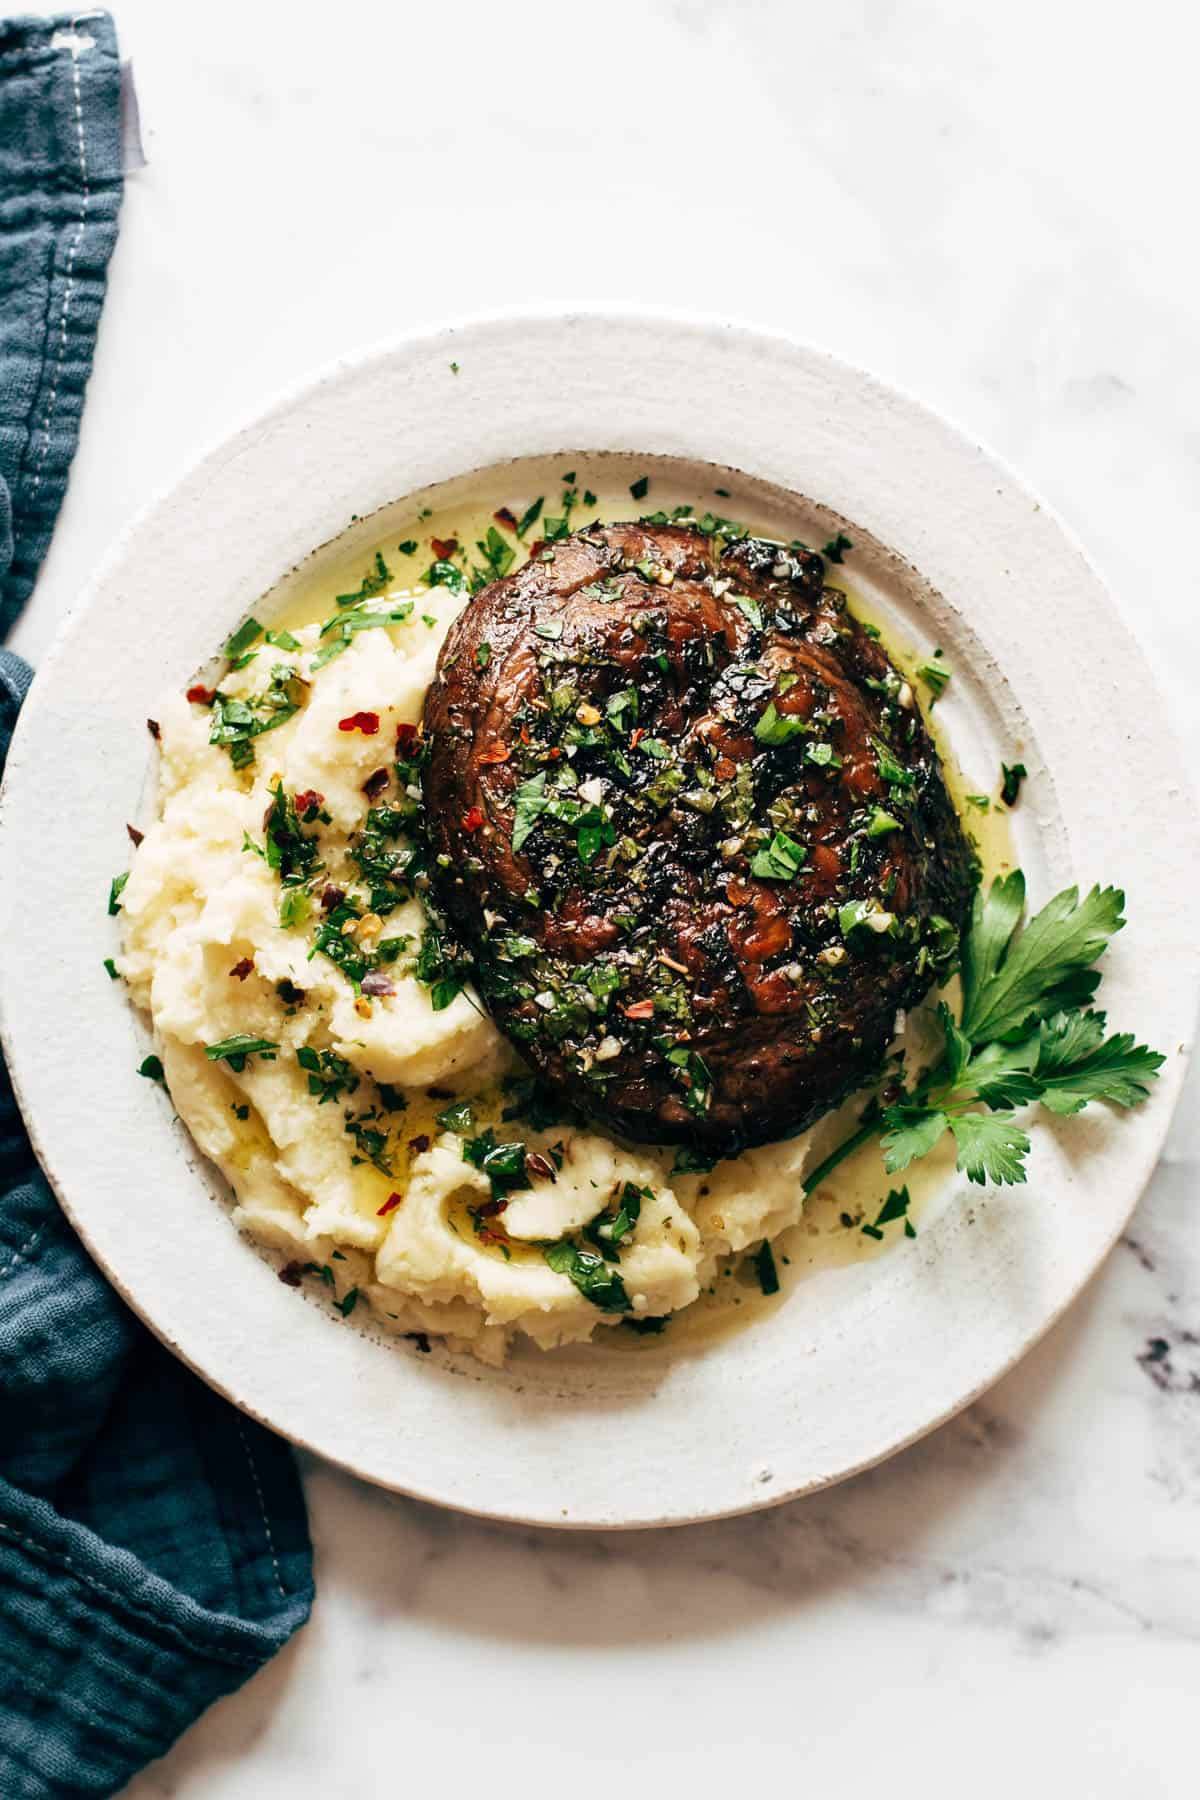 Grilled Chimichurri Portobellos with Goat Cheese Mashed Potatoes